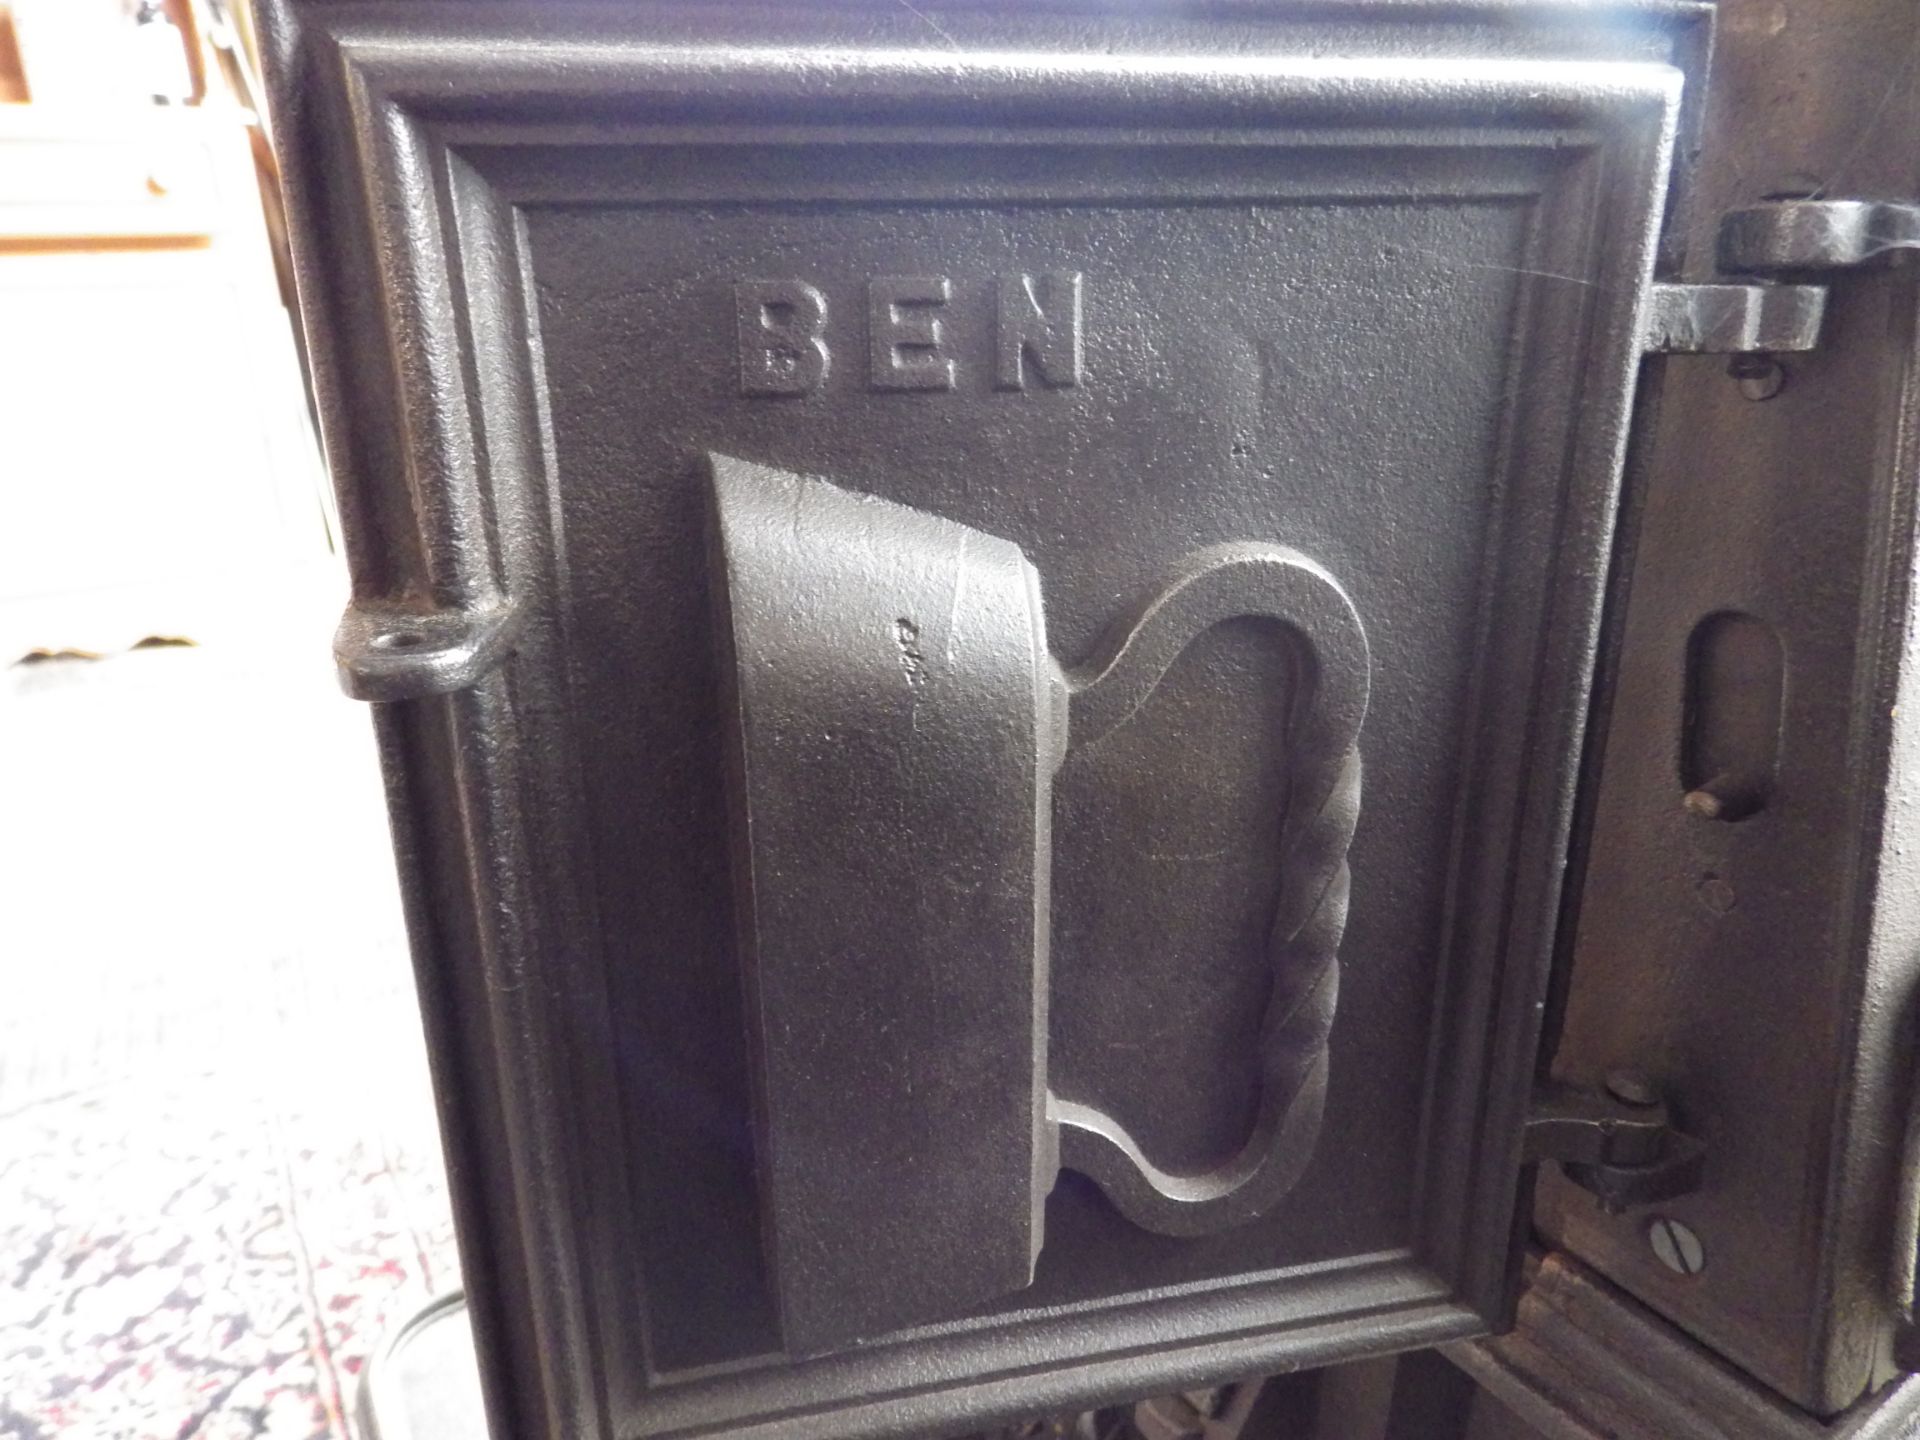 The Wee Ben tailors cast iron laundry stove with ornate door decorations incl two tailor goose irons - Image 6 of 10